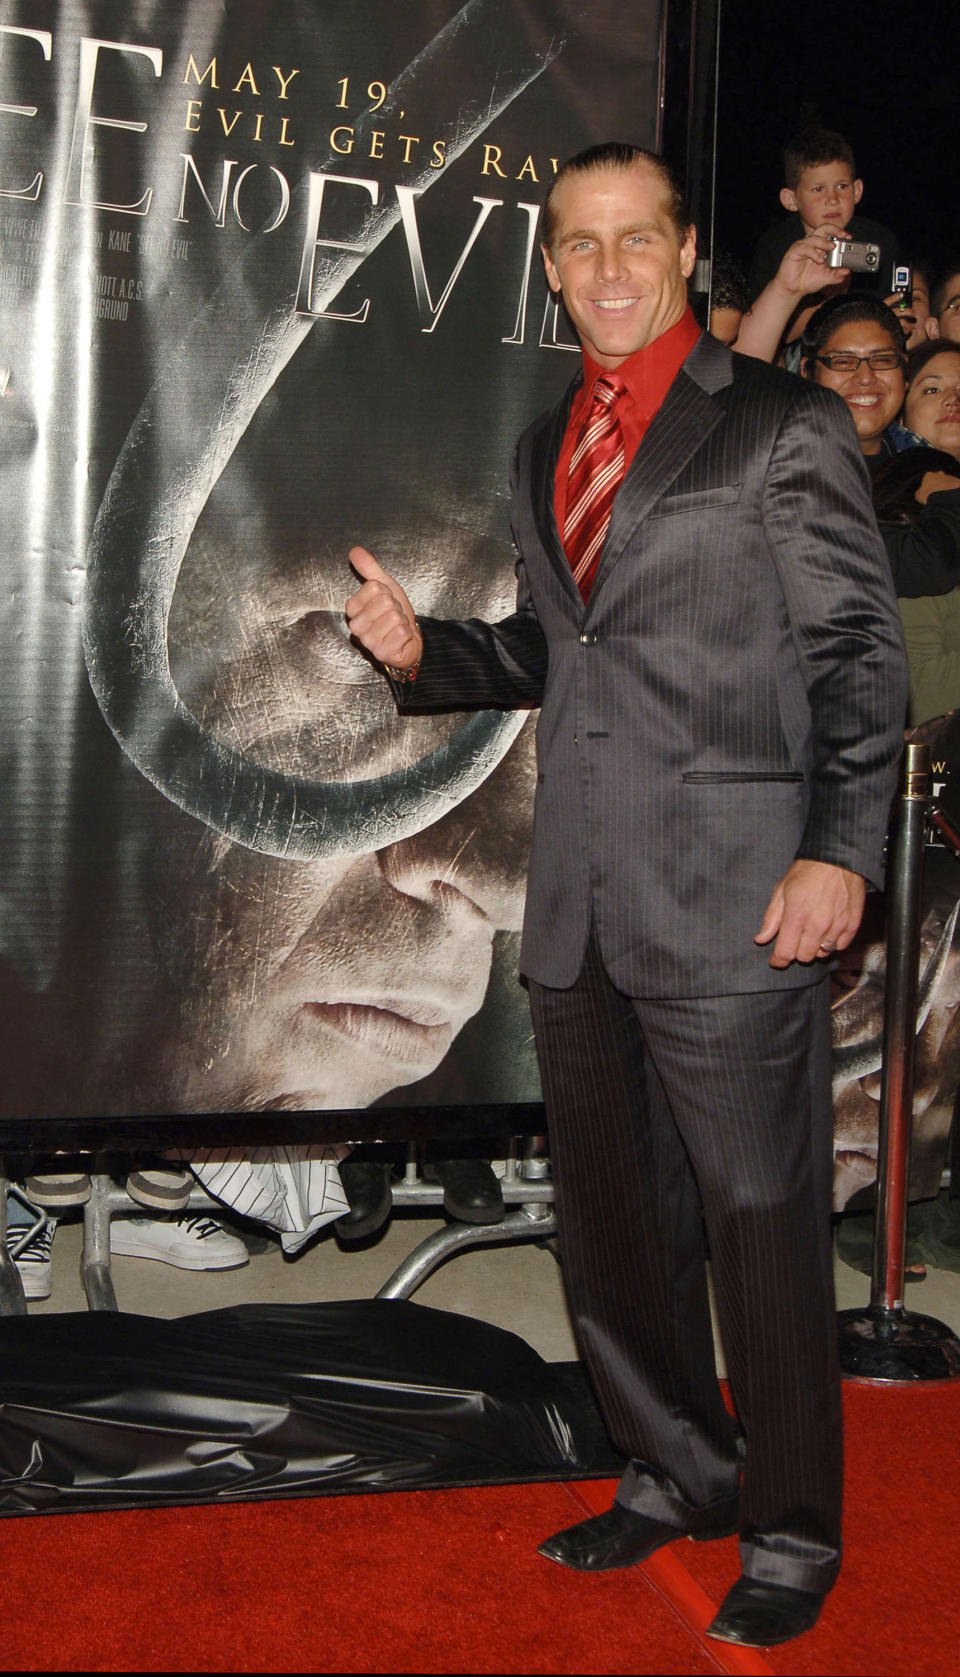 Shawn Michaels, WWE Raw Superstar during 'See No Evil' Premiere - Arrivals in Los Angeles, California, United States. (Photo by J.Sciulli/WireImage for LIONSGATE)